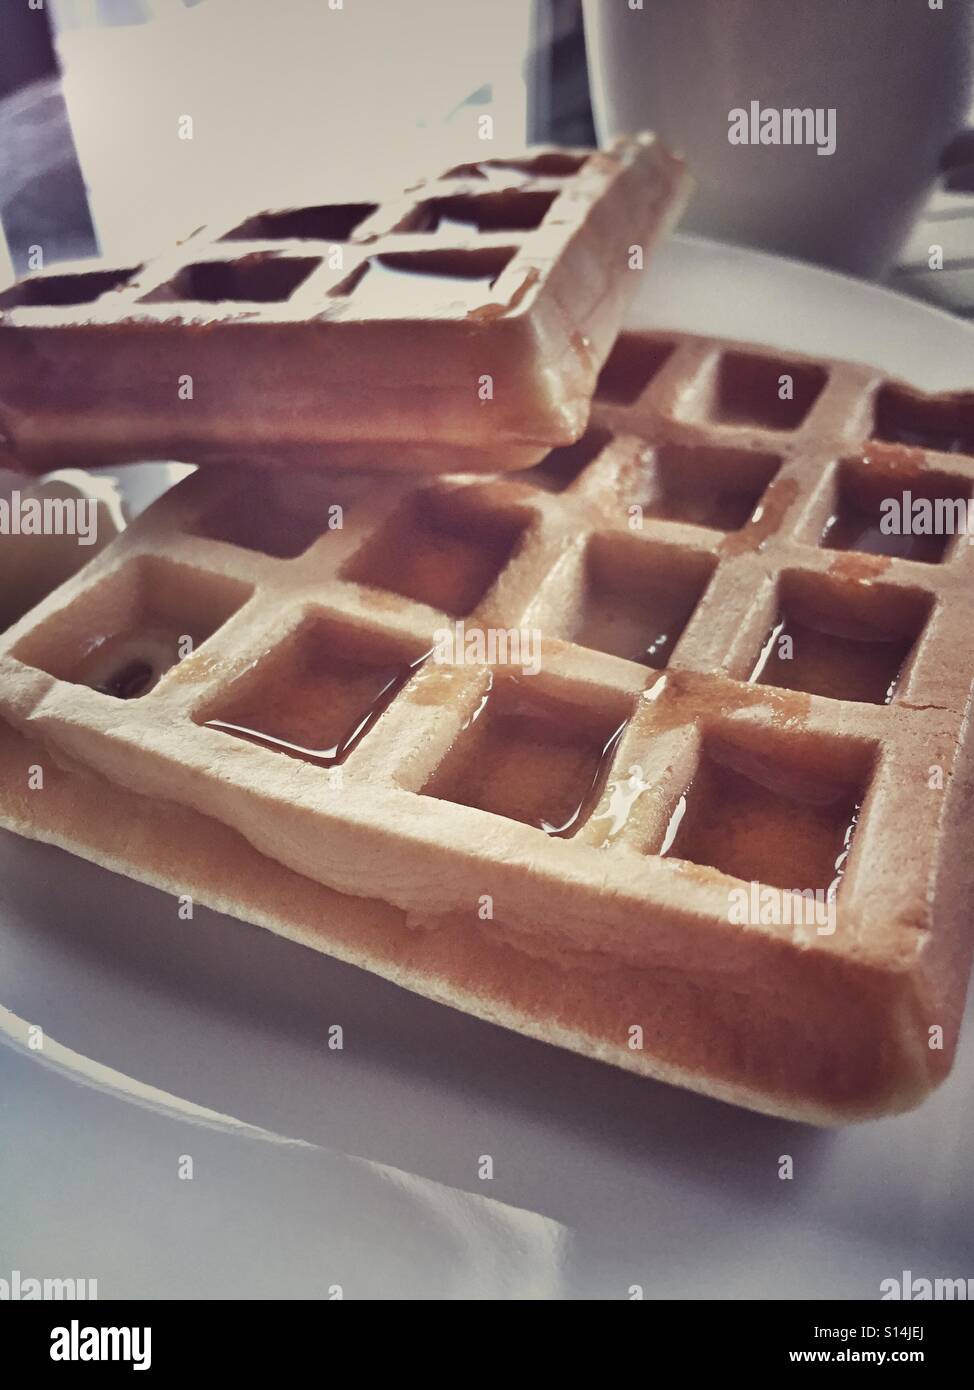 Two waffles on a plate Stock Photo